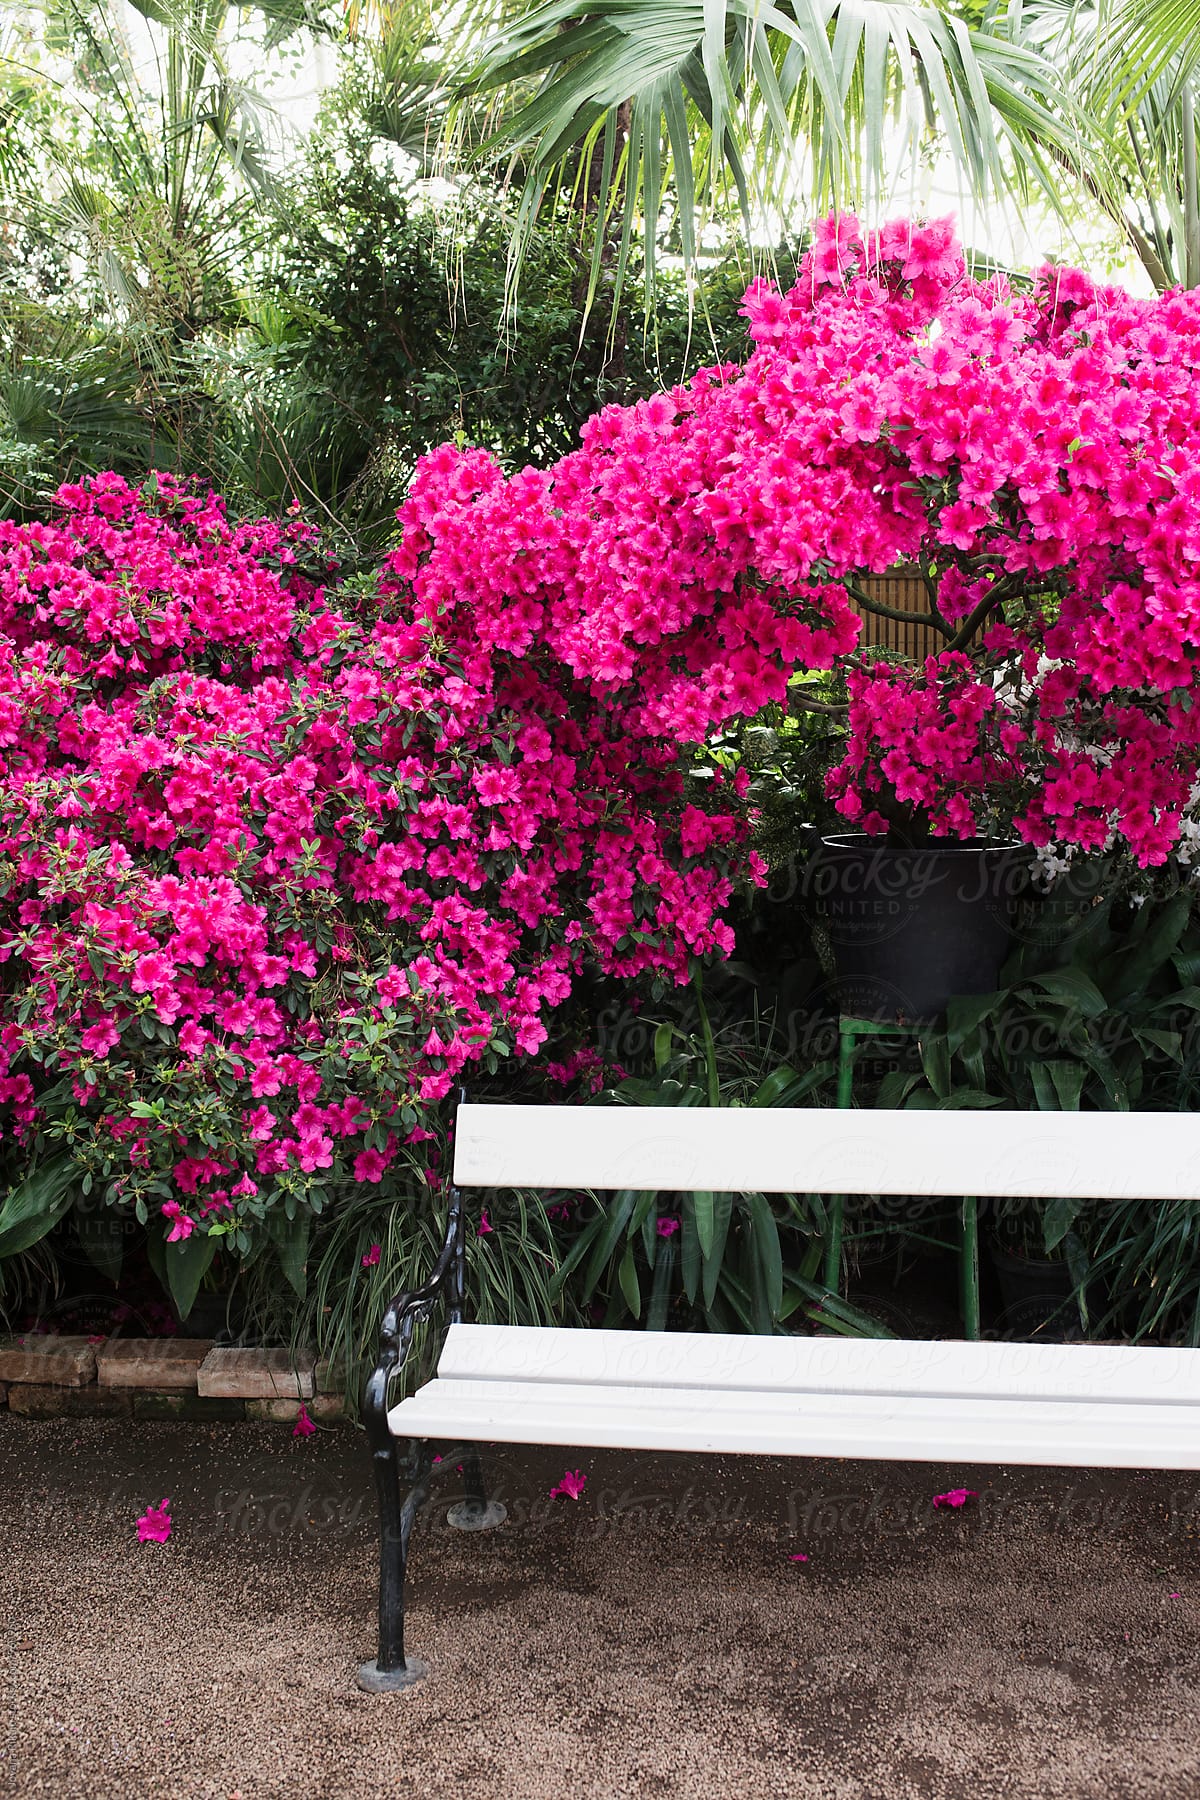 Bench and pink flowers